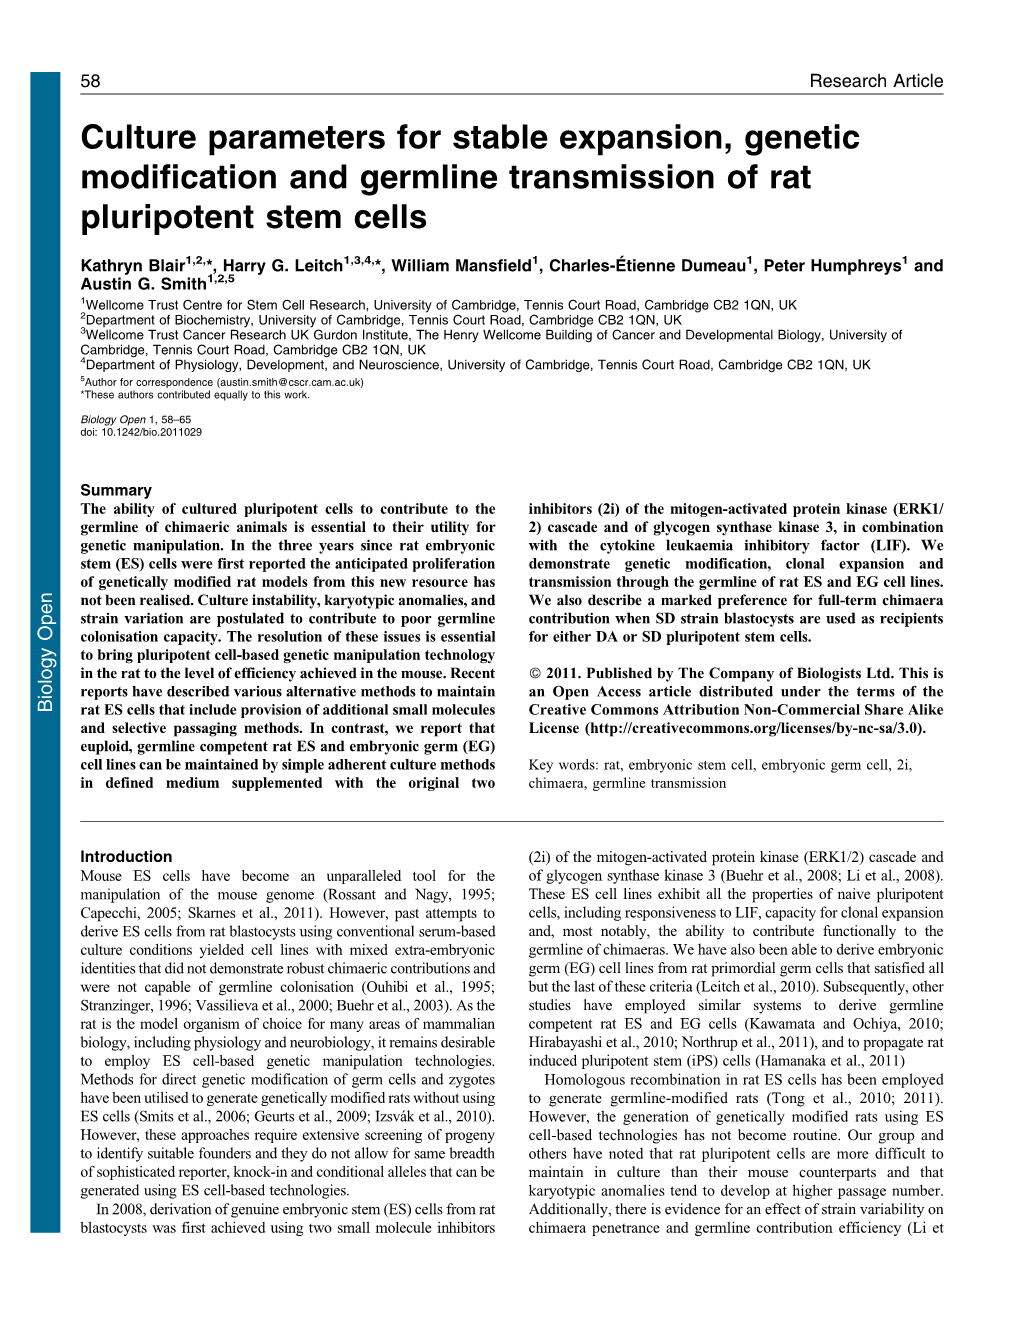 Culture Parameters for Stable Expansion, Genetic Modification and Germline Transmission of Rat Pluripotent Stem Cells